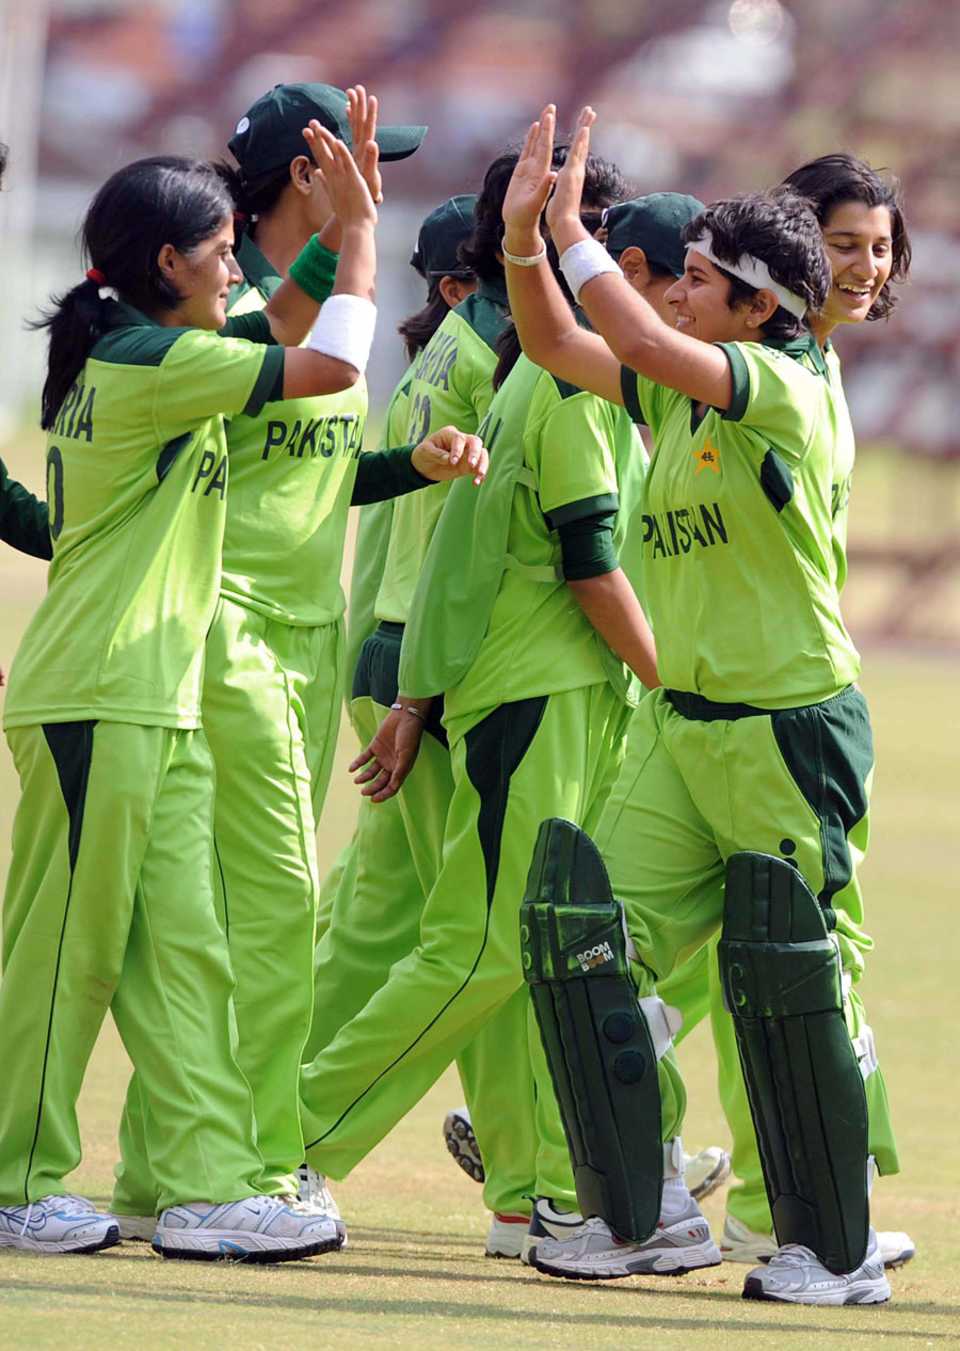 The Pakistan players celebrate on their way to an easy opening victory